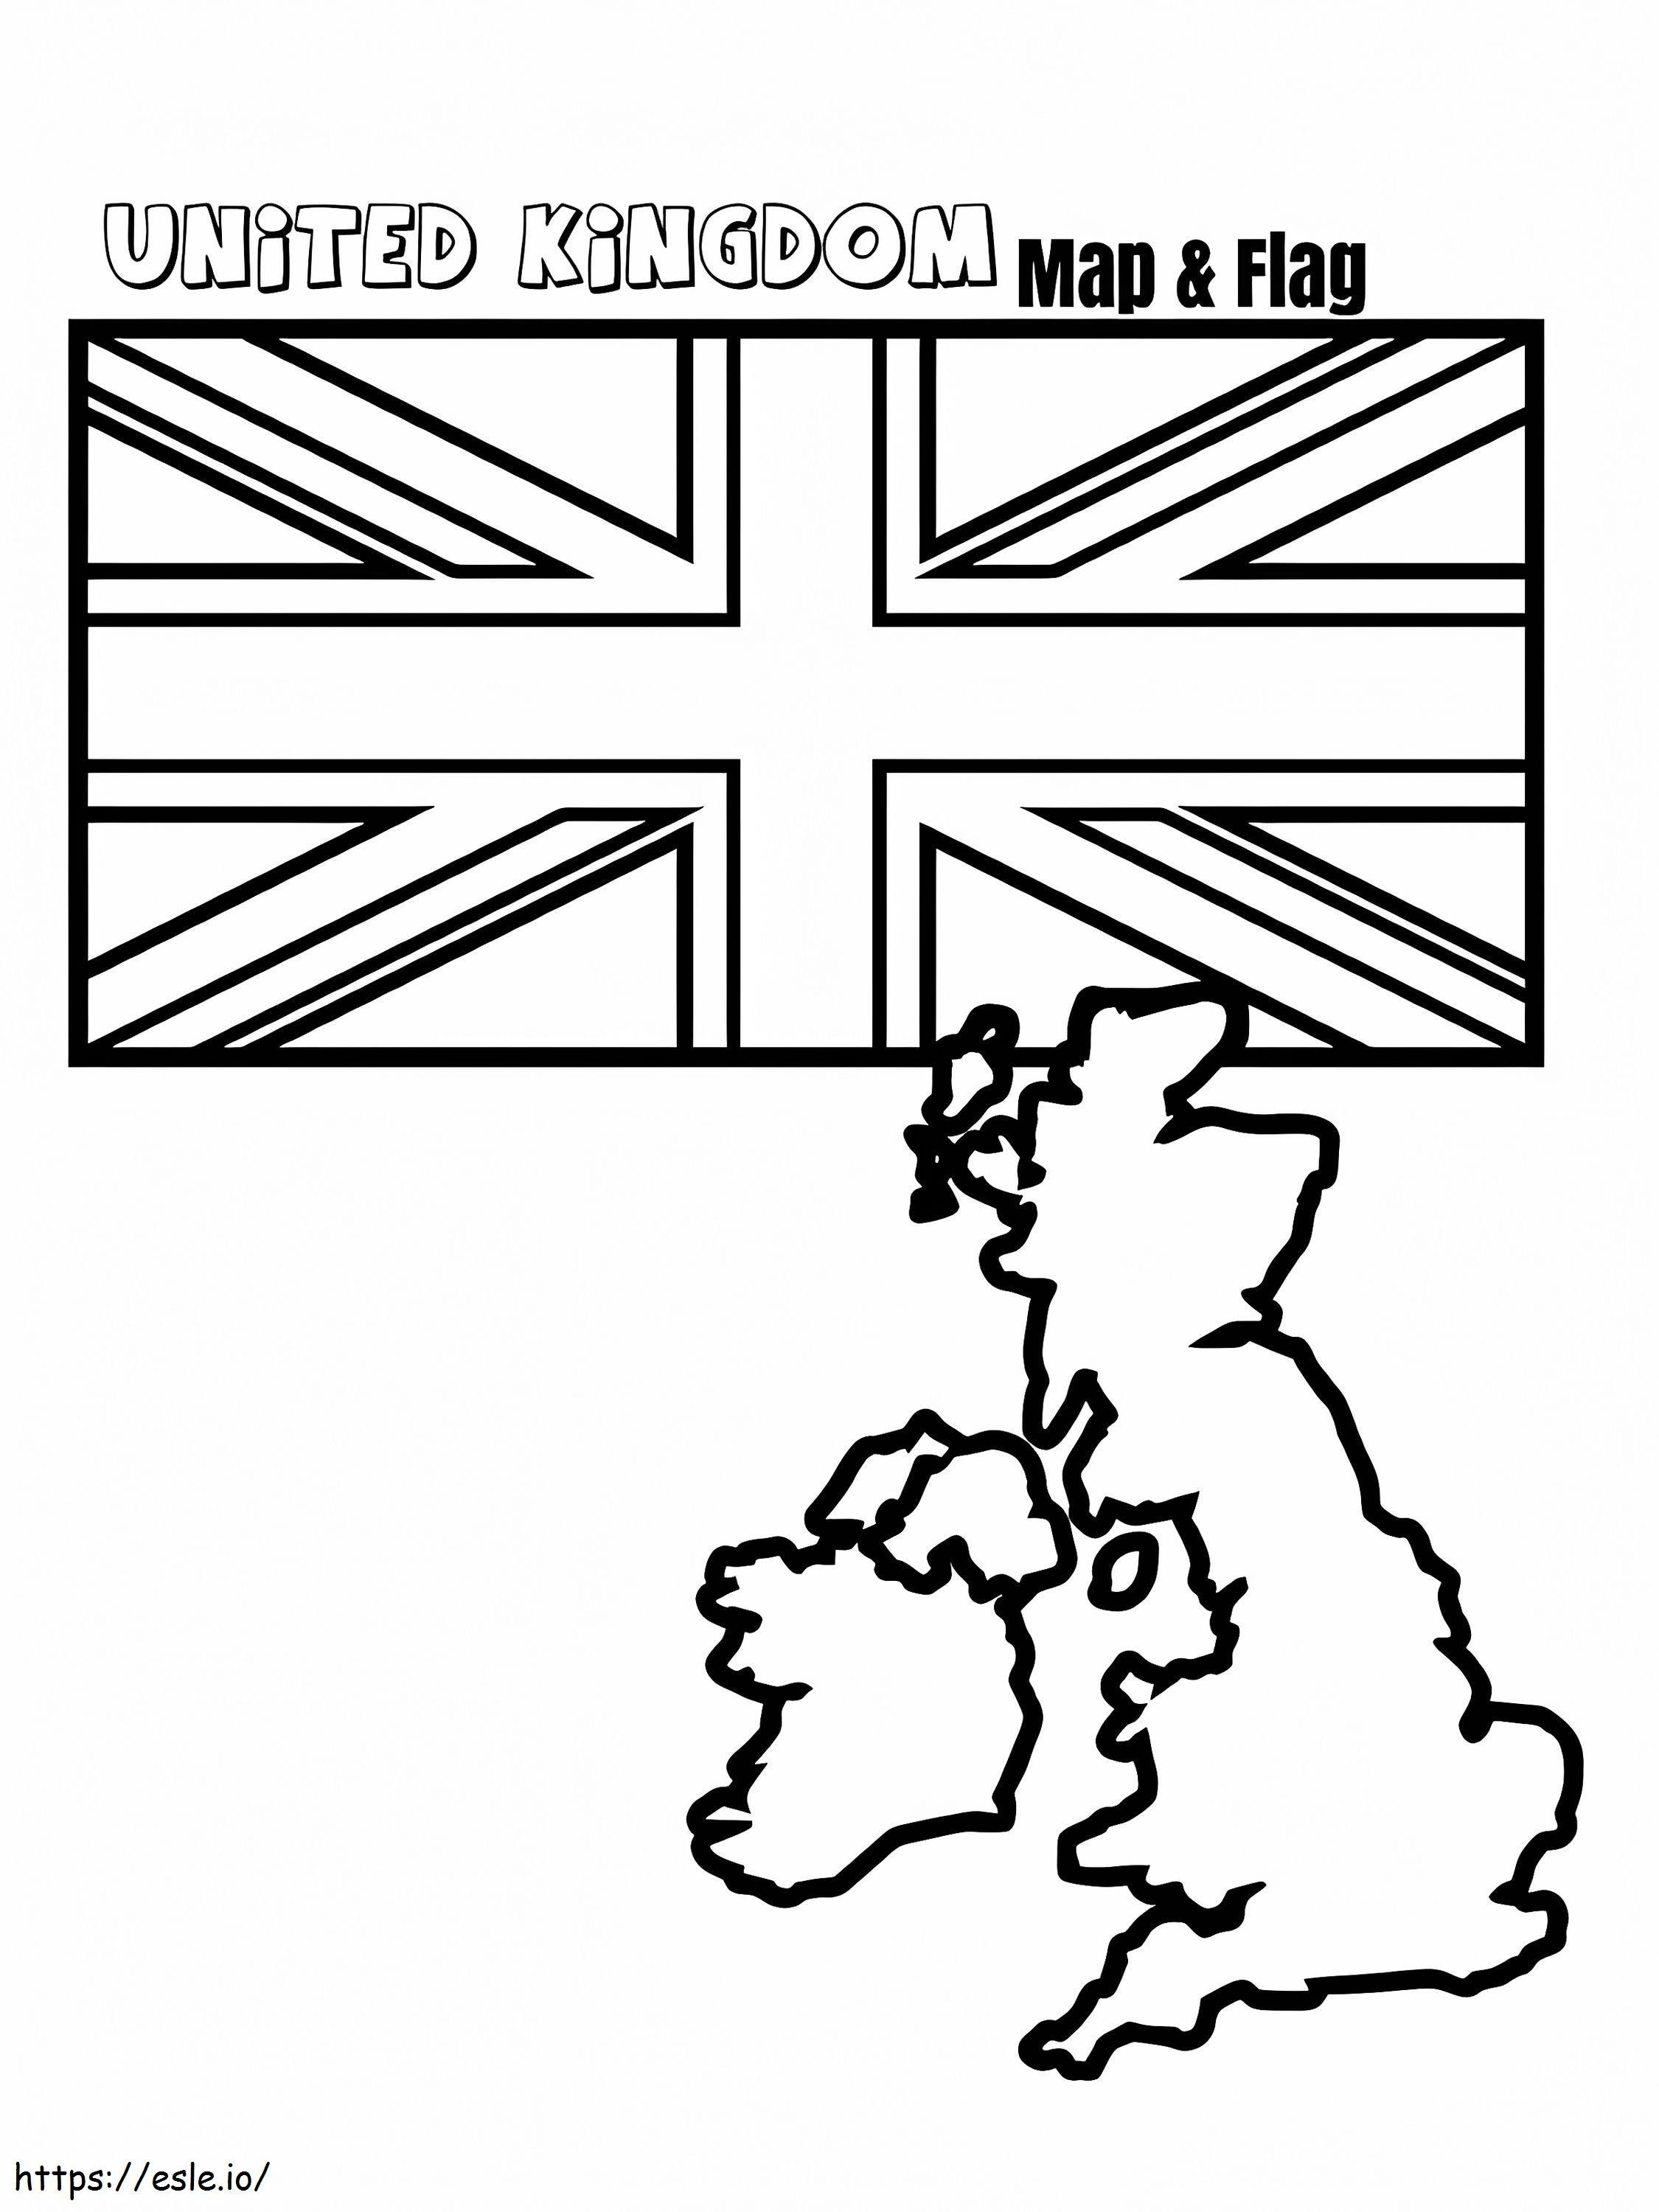 United Kingdom Flag And Map coloring page